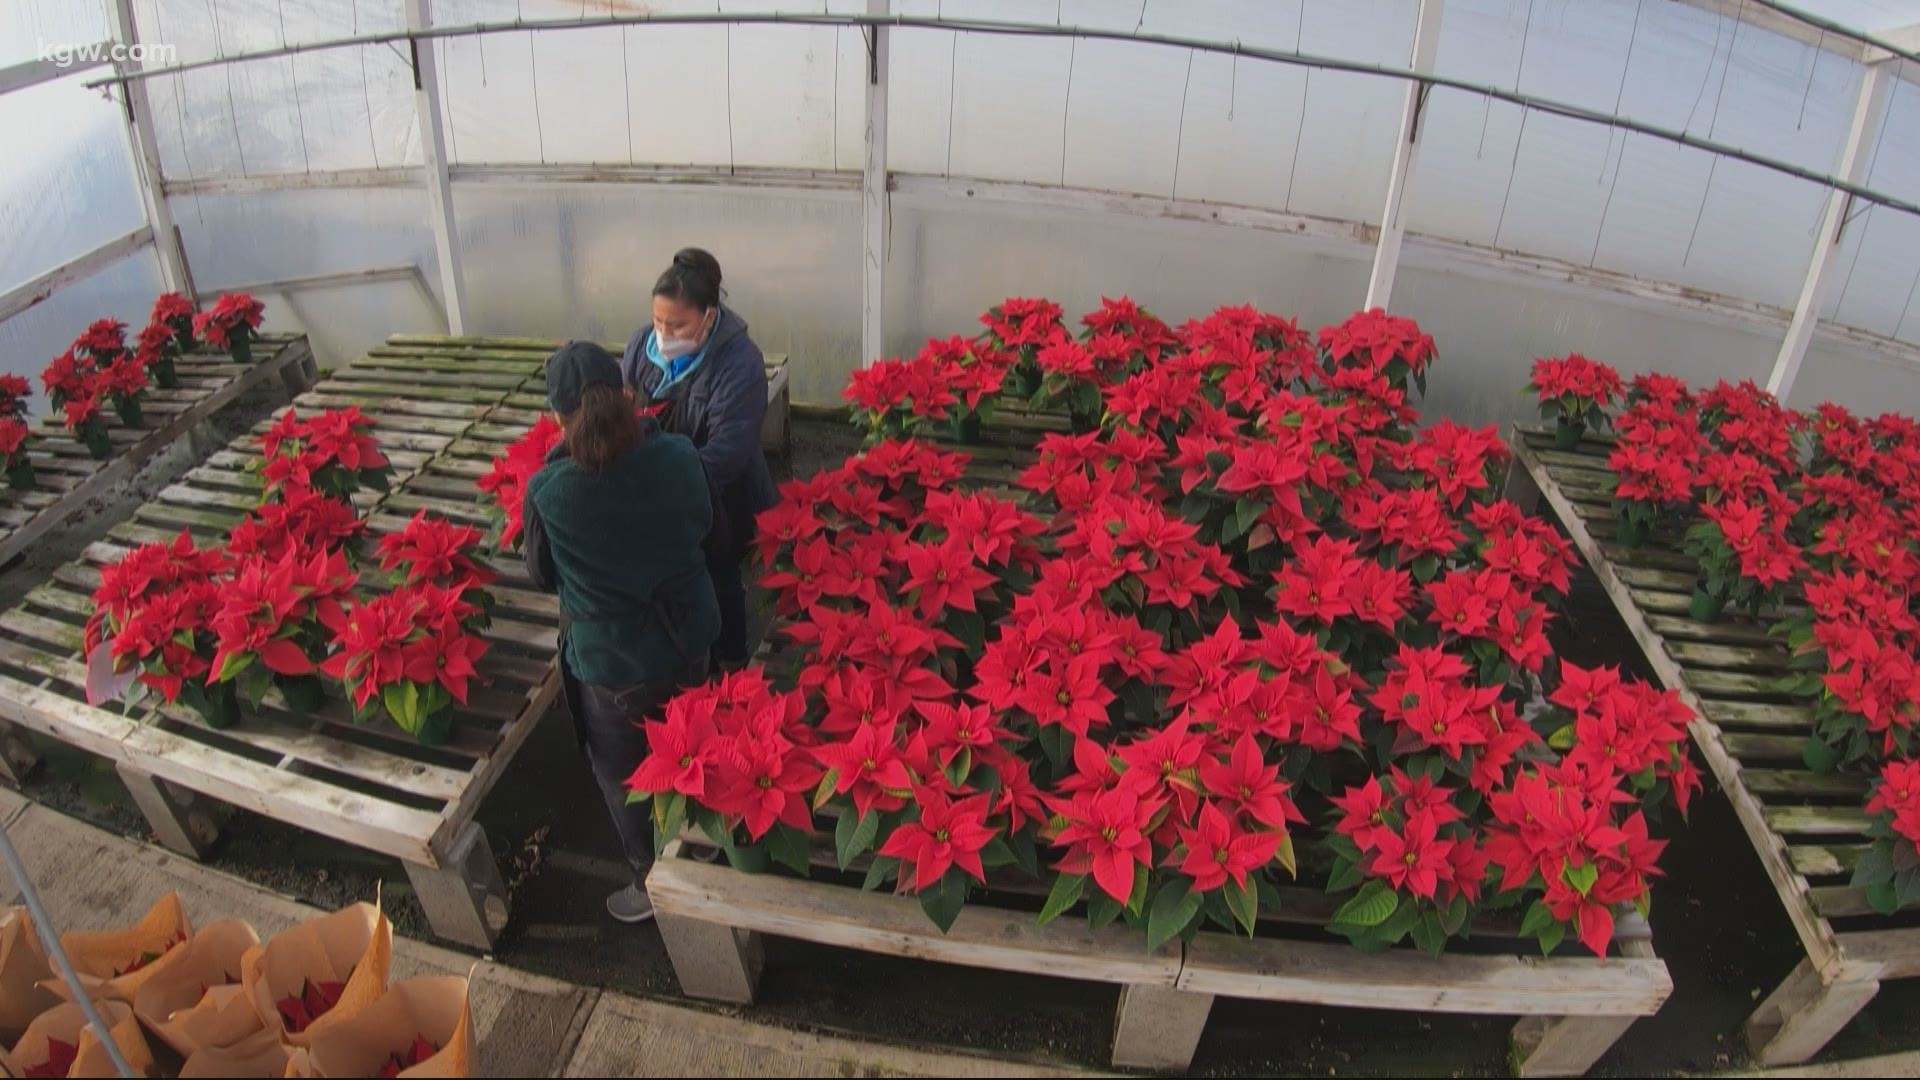 The owner of a Cornelius greenhouse is making a colorful donation to assisted living centers around Portland. Jon Goodwin has the story.